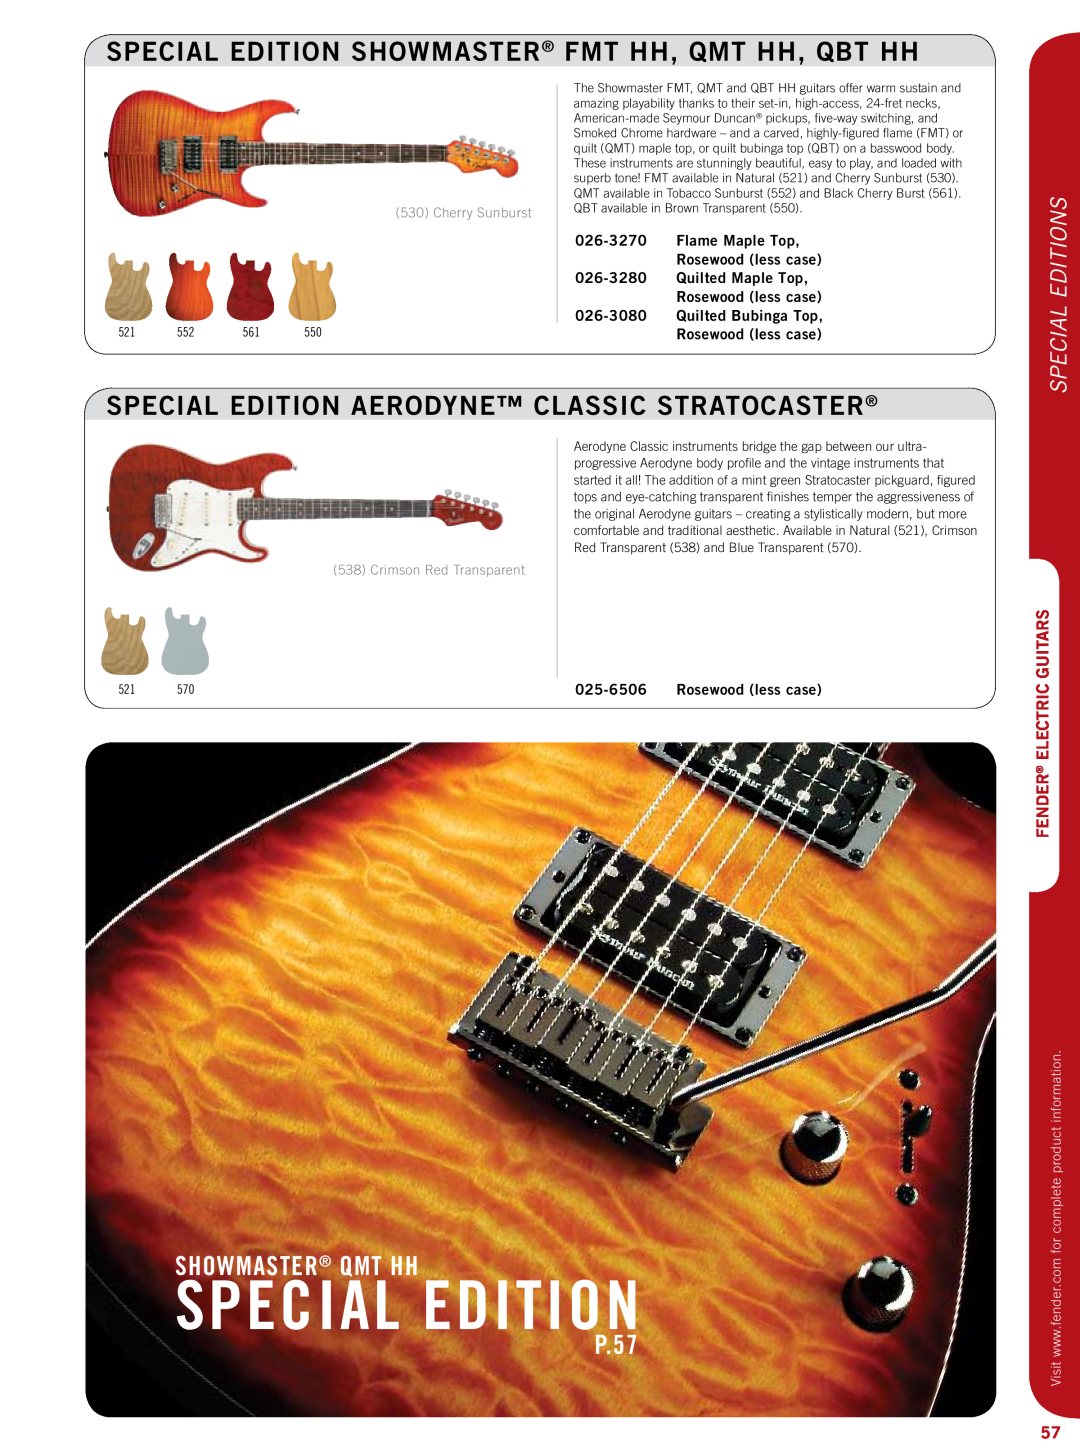 Fender 011-9700 Special edition SHOWMASTER FMT HH, QMT HH, QBT HH, special edition AERODYNE CLASSIC STRATOCASTER, p.57 